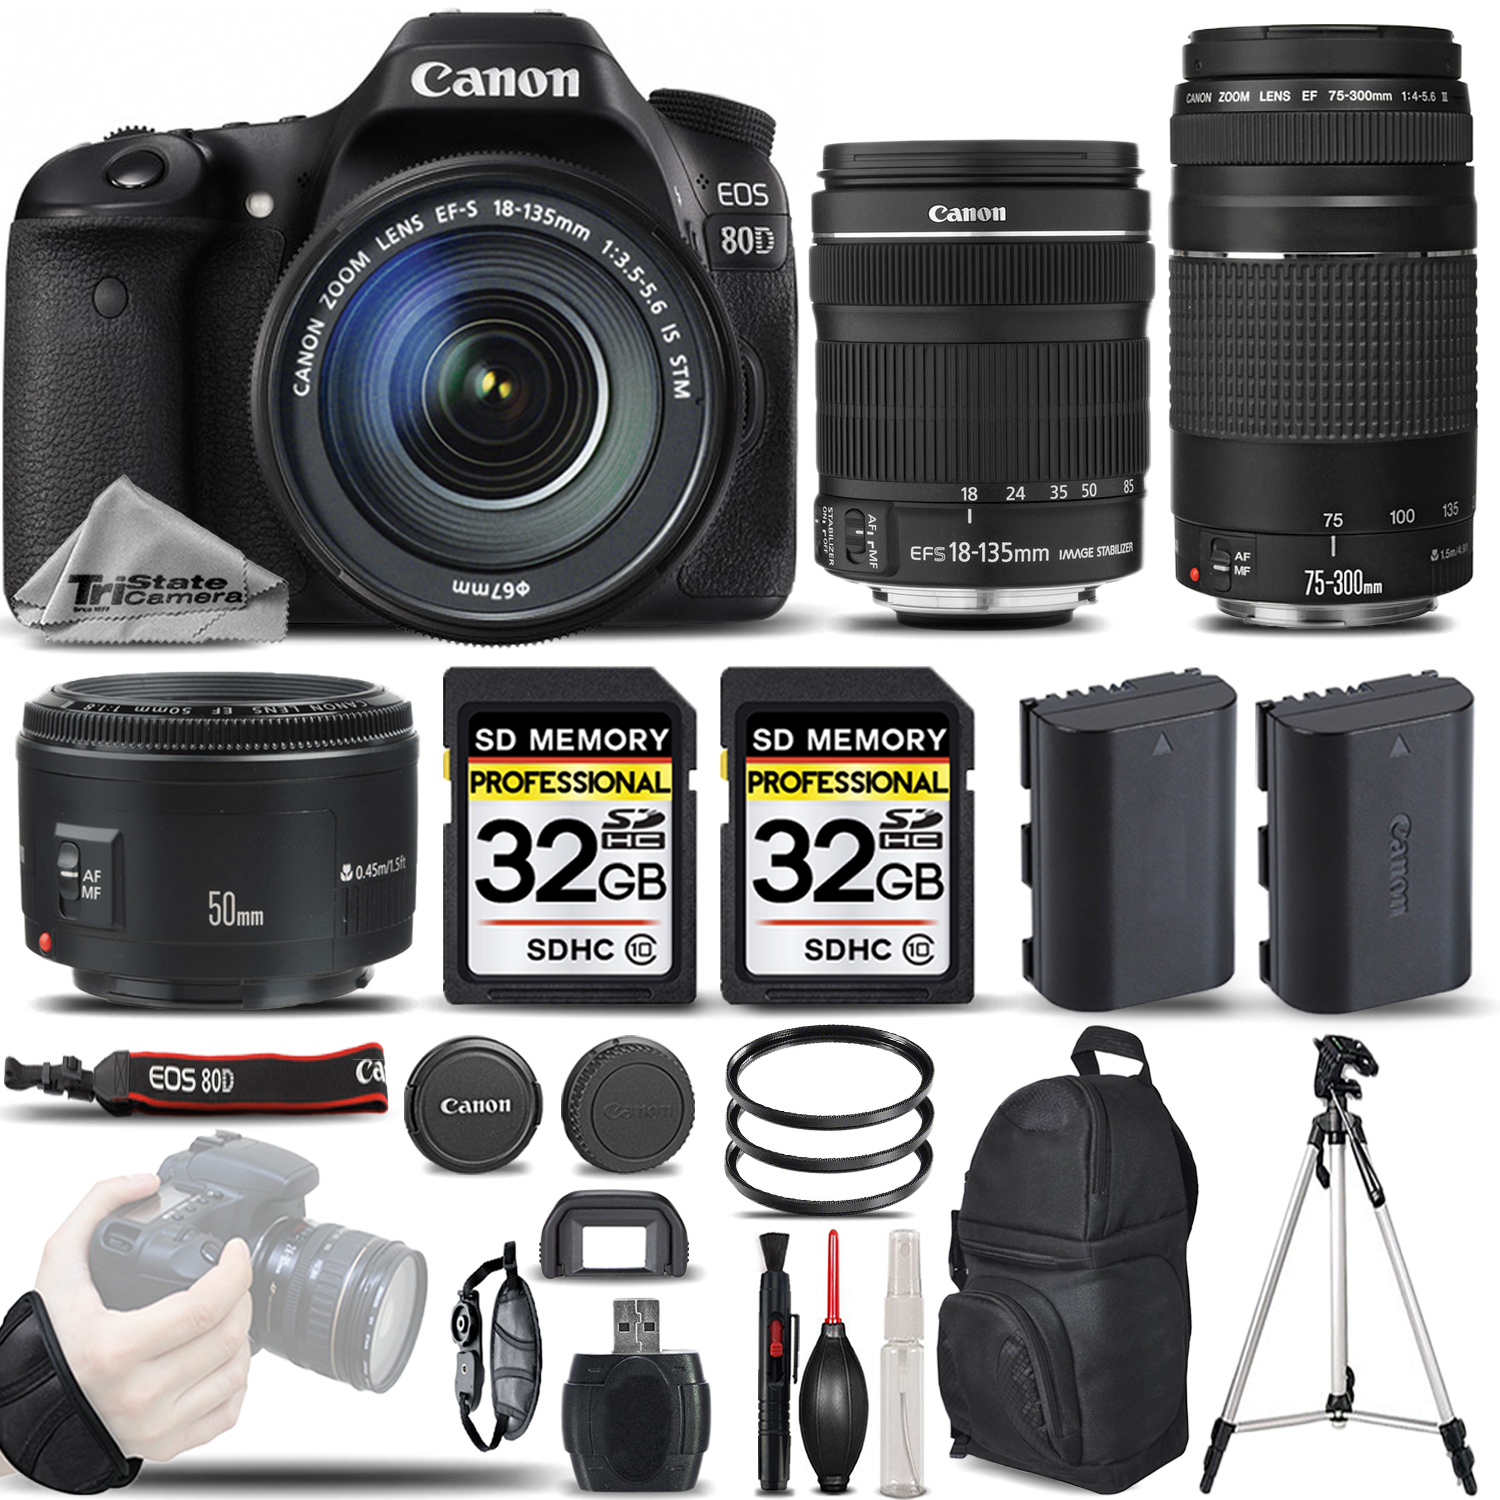 EOS 80D DSLR Camera + Canon 18-135mm IS STM Lens +Canon 75-300 III + 64GB *FREE SHIPPING*